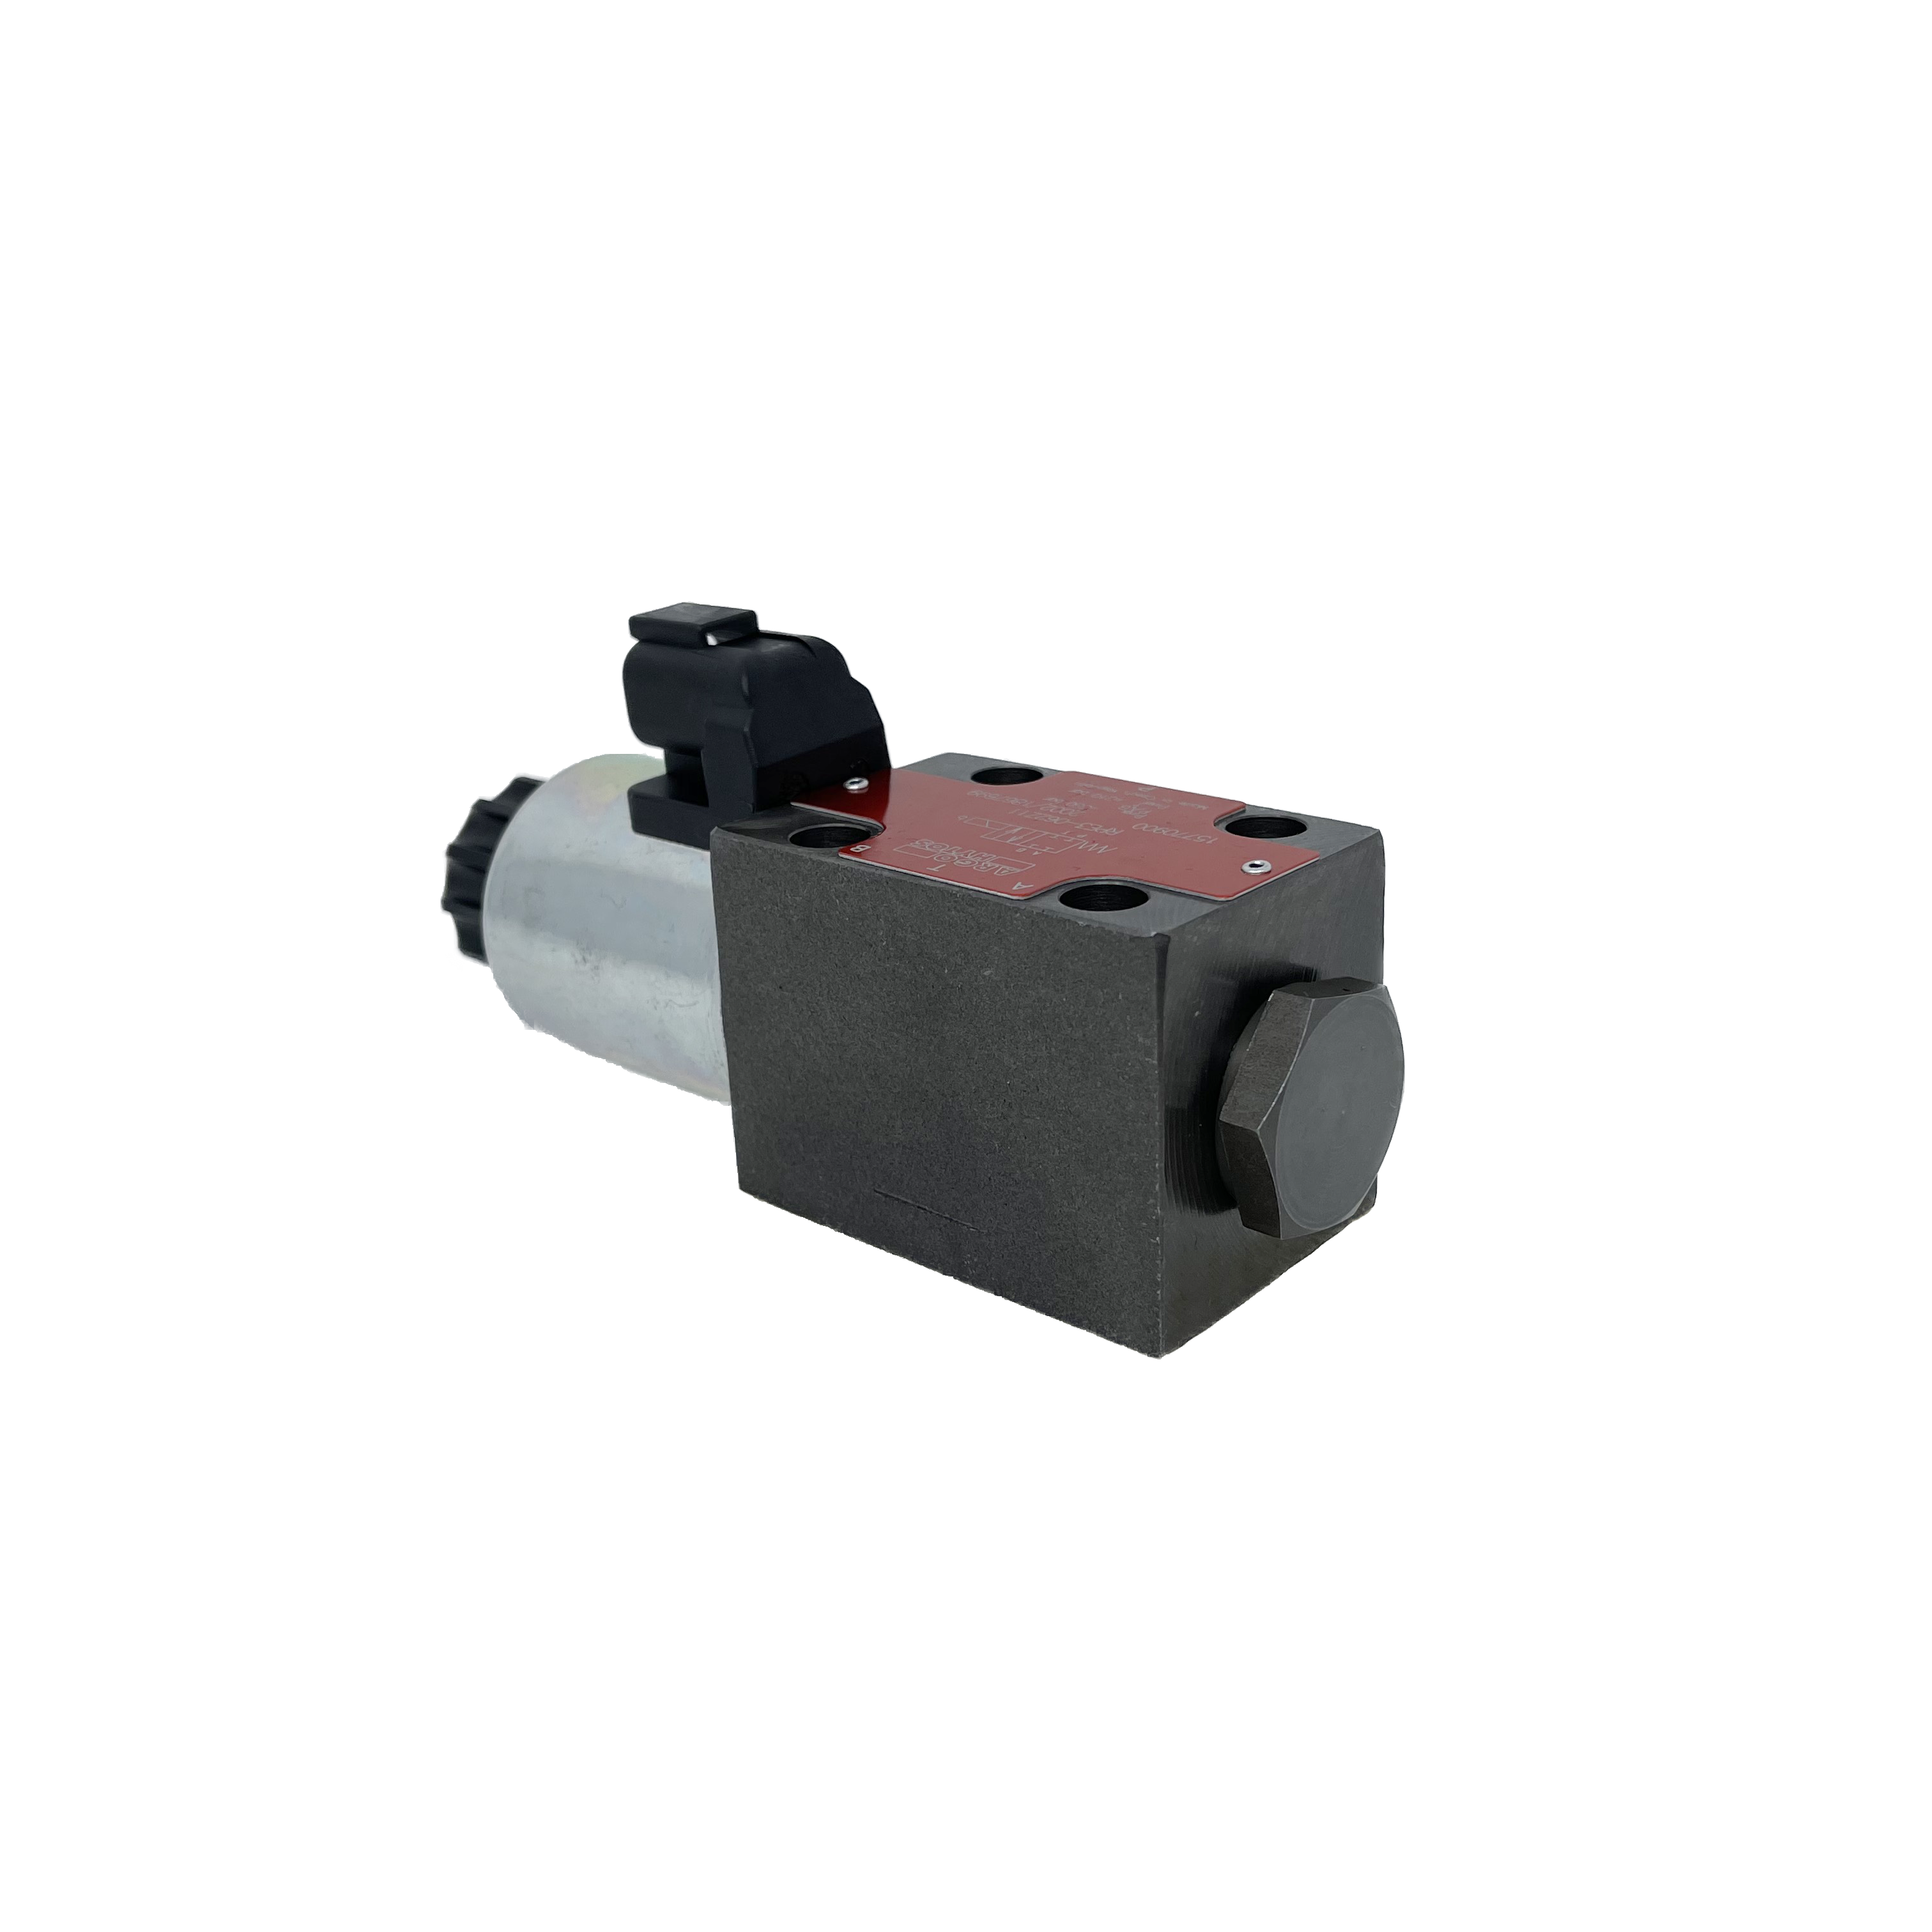 RPE3-062R11/02400E12A : Argo Hytos Directional Control Valve, D03 (NG6), 21GPM, 5100psi, 2P4W, 24 VDC, Deutsch, Spring Return, P to A & B to T Neutral, Coil Side A